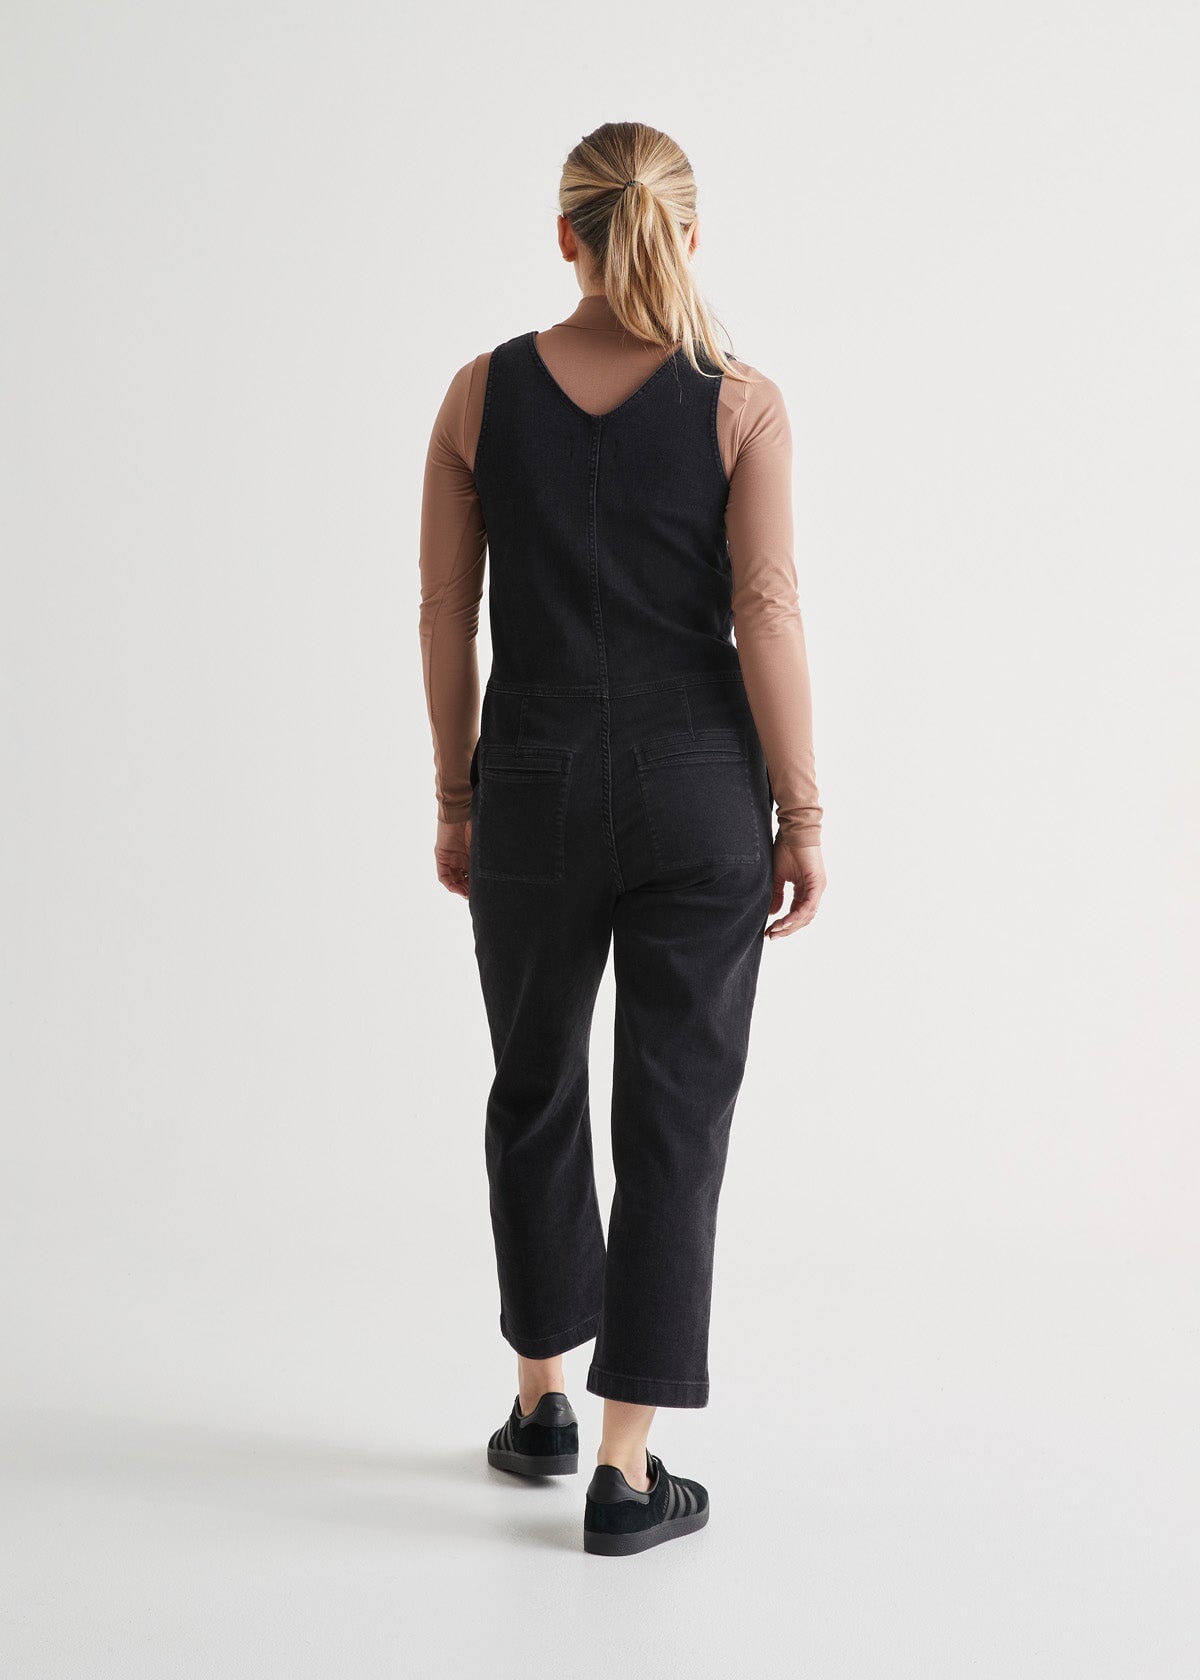 Designer Black Jeans And Dungaree Jumpsuit For Women And Men Plus Size,  Straight, Double Shoulder, Fashionable Denim Design For Clubbing And  Everyday Wear From Bianvincentyg, $38.84